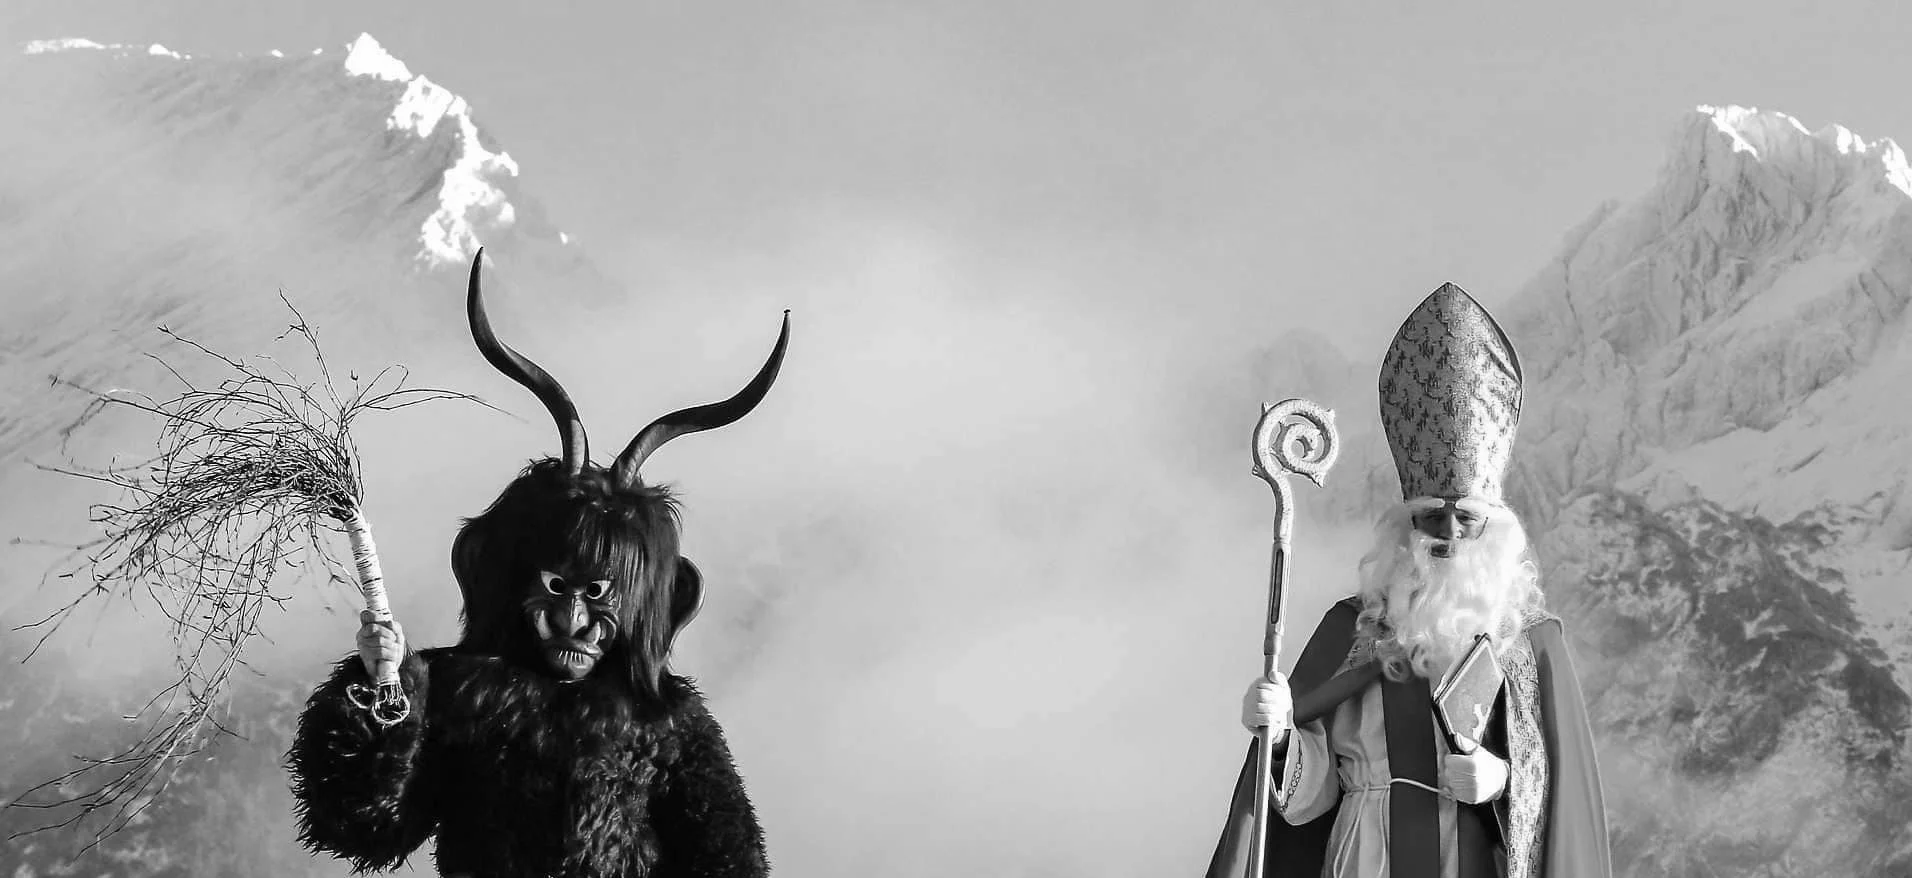 futured-Austria-Southtyrol-On-St.-Nicholas-and-the-Krampus-in-Tyrol